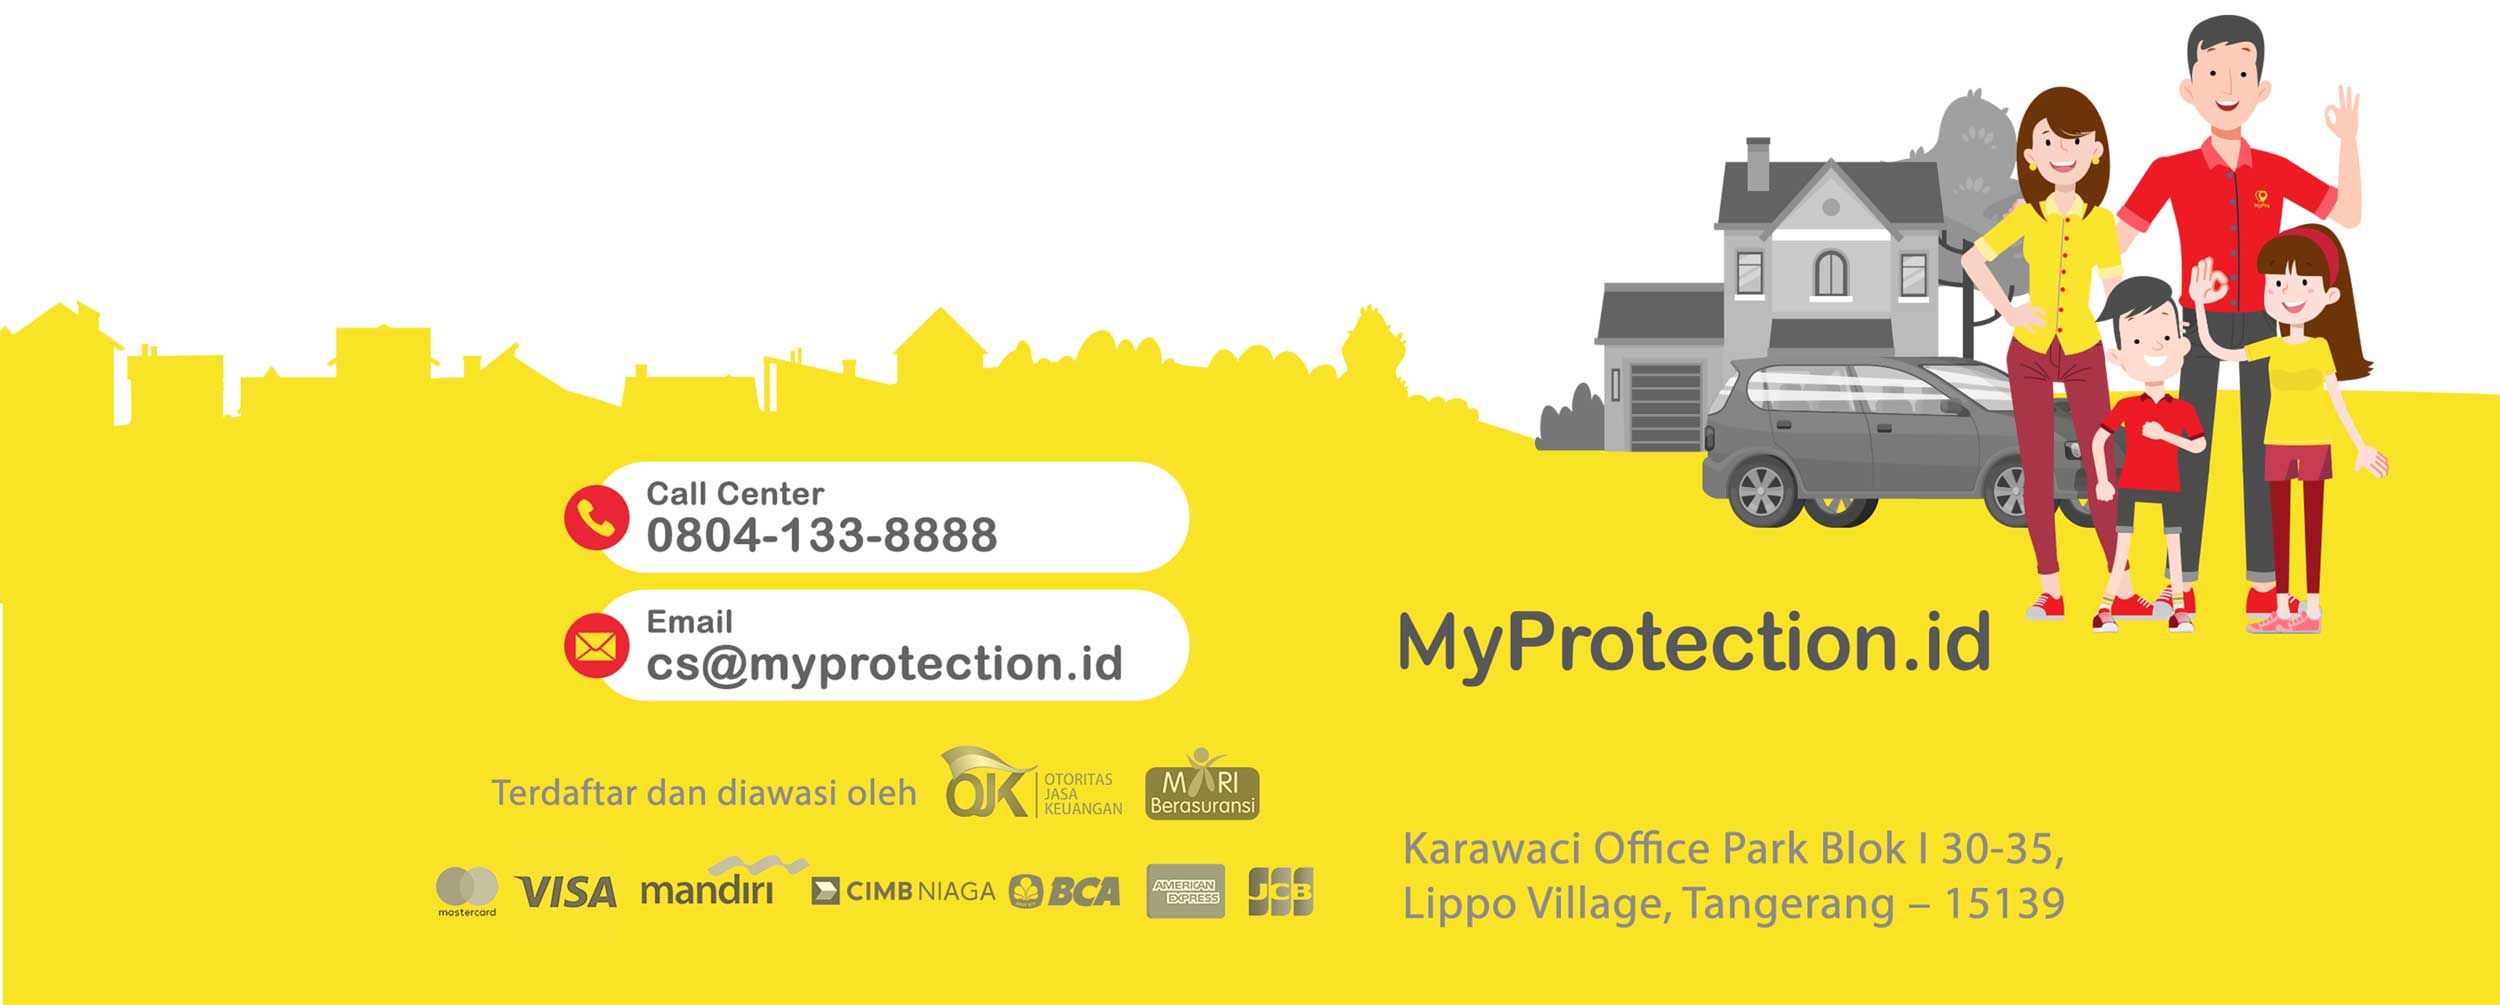 Copyright 2022 MyProtection.id